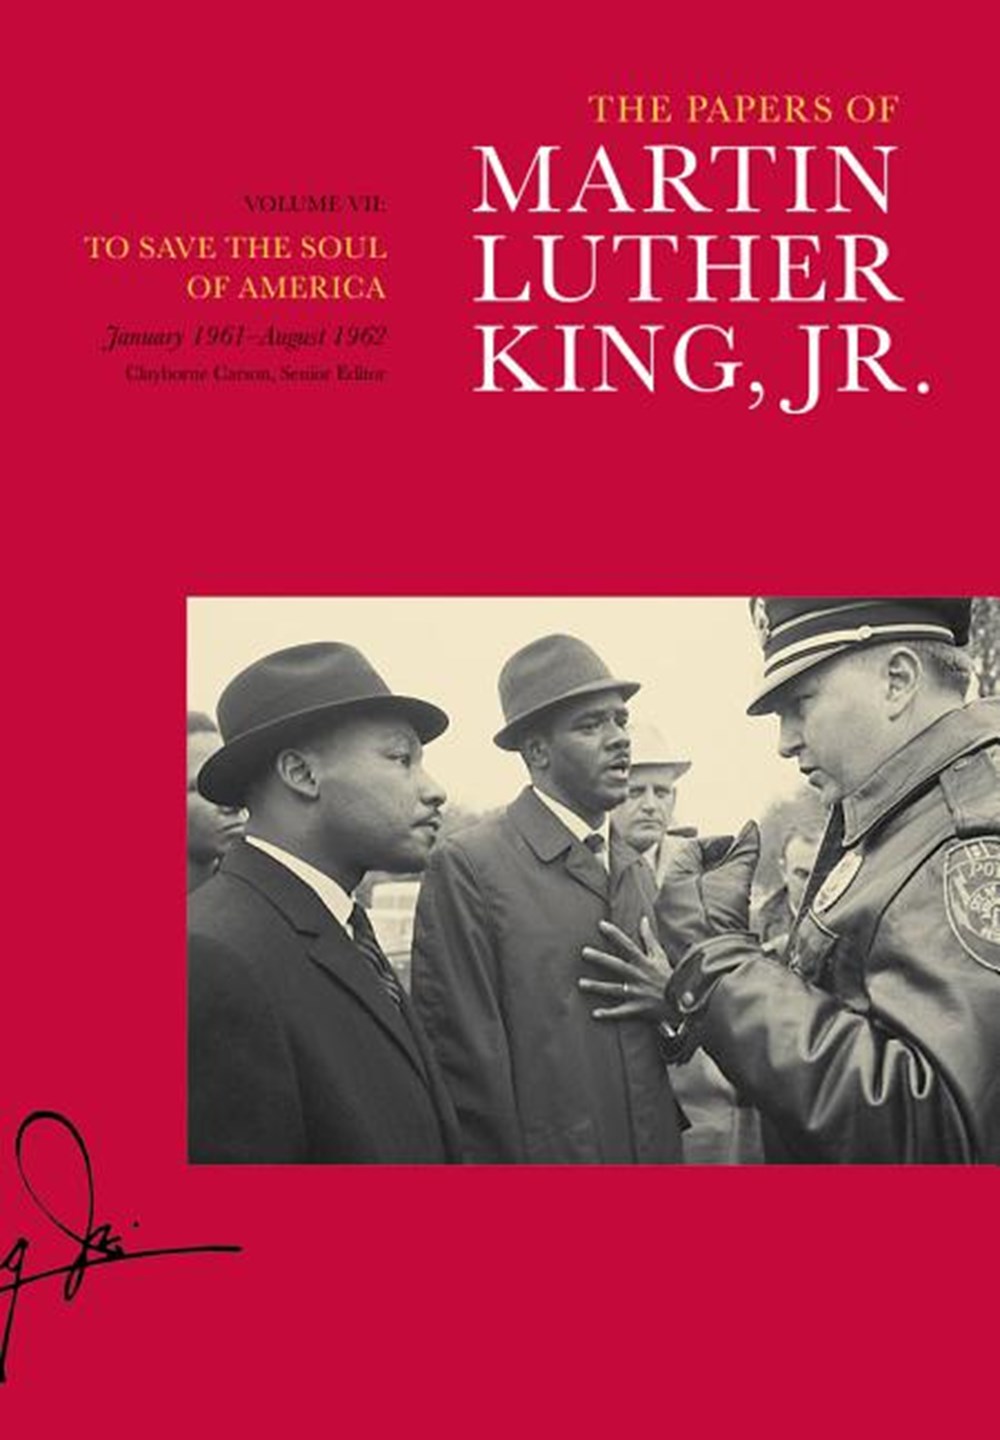 Papers of Martin Luther King, Jr., Volume VII: To Save the Soul of America, January 1961-August 1962